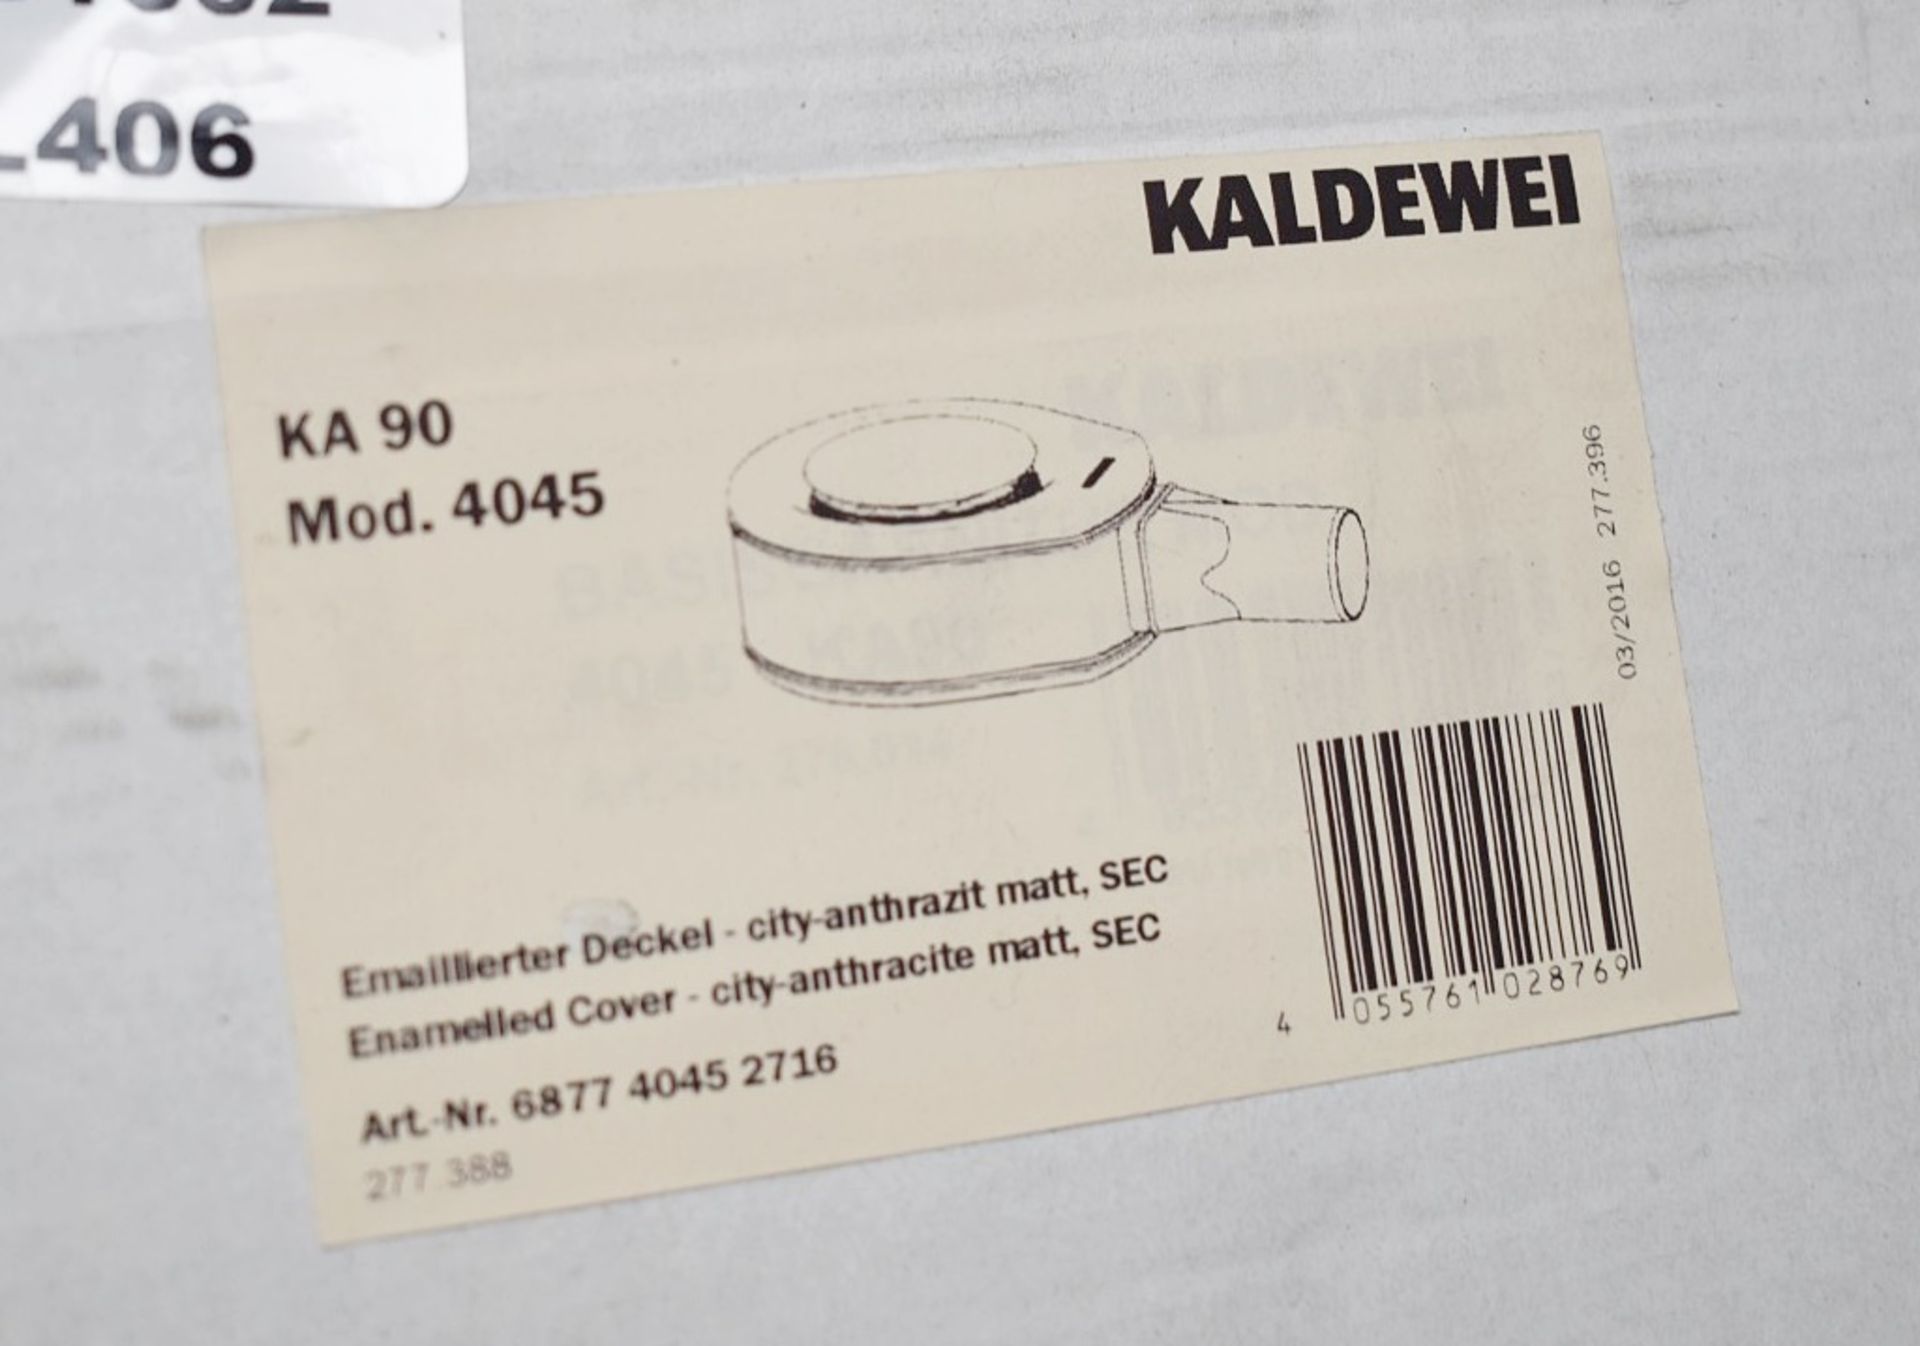 1 x KALDEWEI 4045 Waste and Cover, In Anthracite Grey - Boxed Stock - RRP £166.00 - Prod: BST25941 - - Image 2 of 4